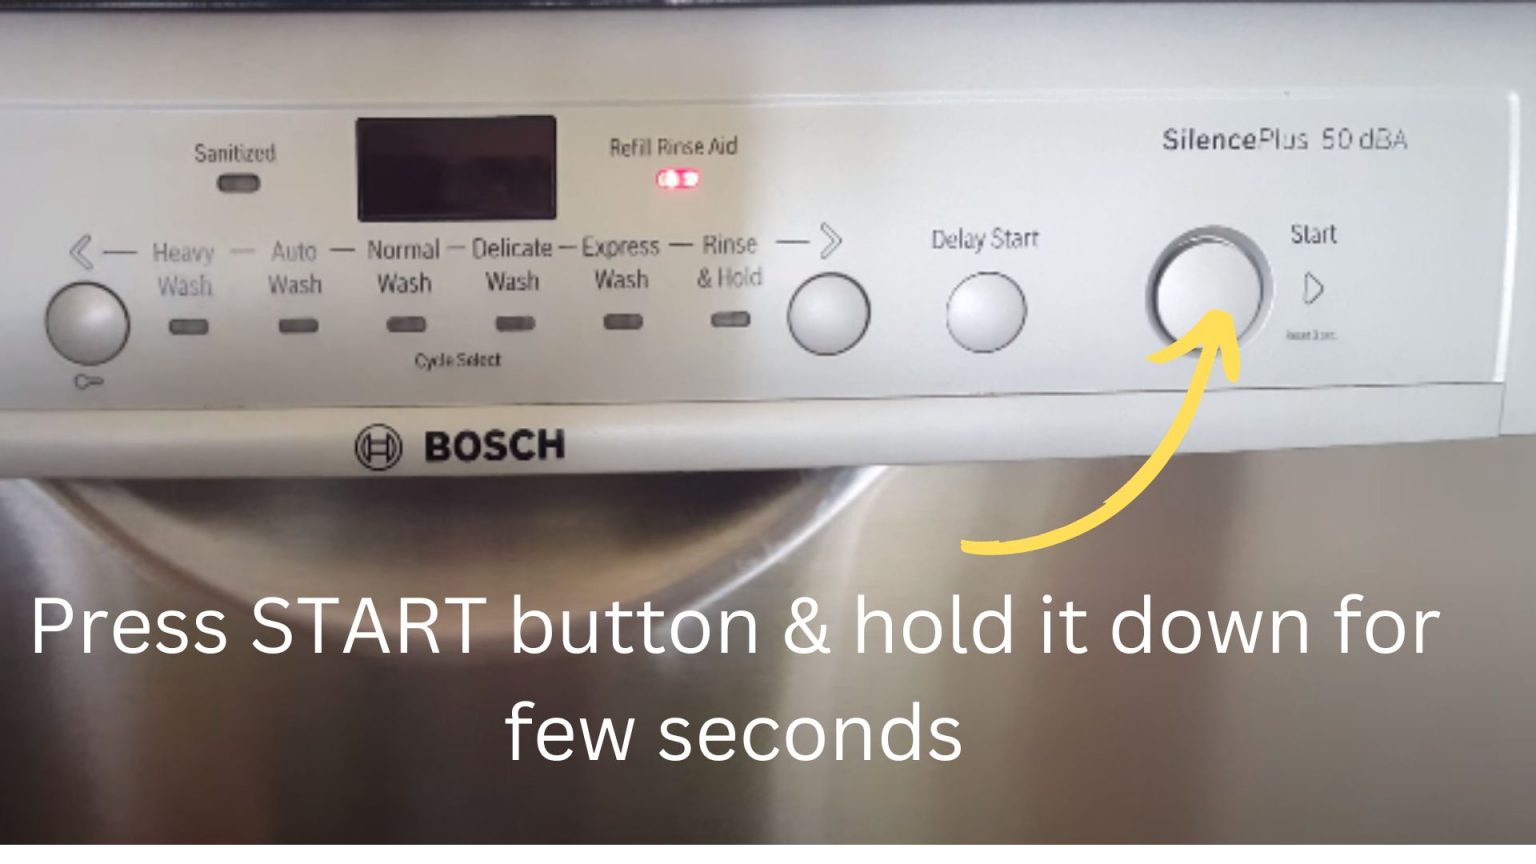 reset-bosch-dishwasher-silence-plus-50-dba-step-by-step-rectifyhome